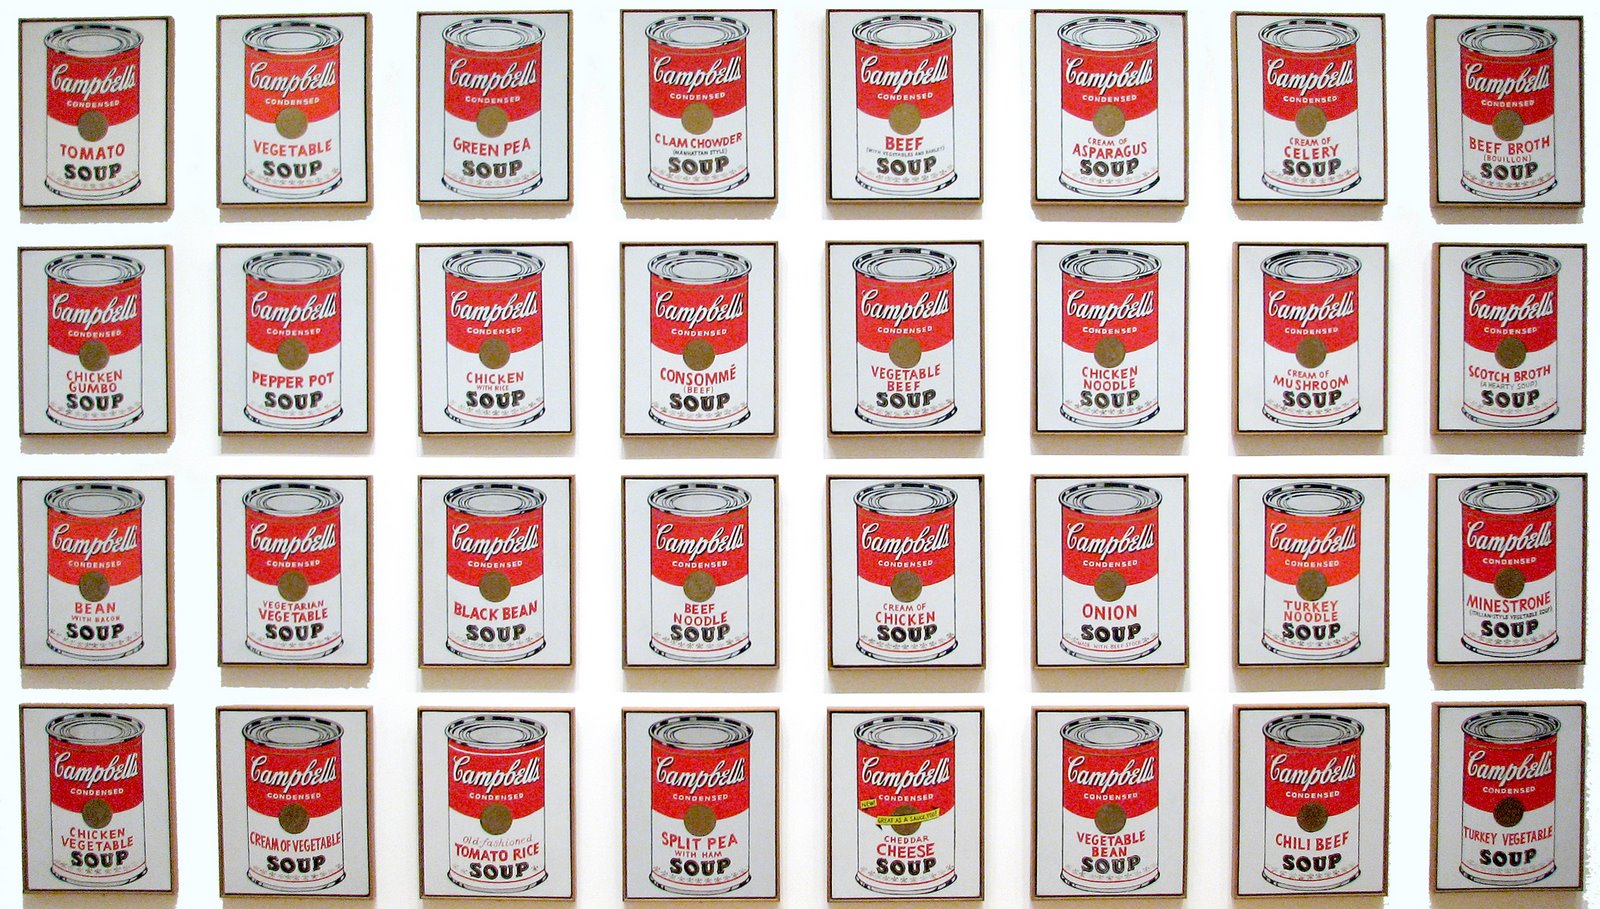 [Campbells_Soup_Cans_MOMA.jpg]